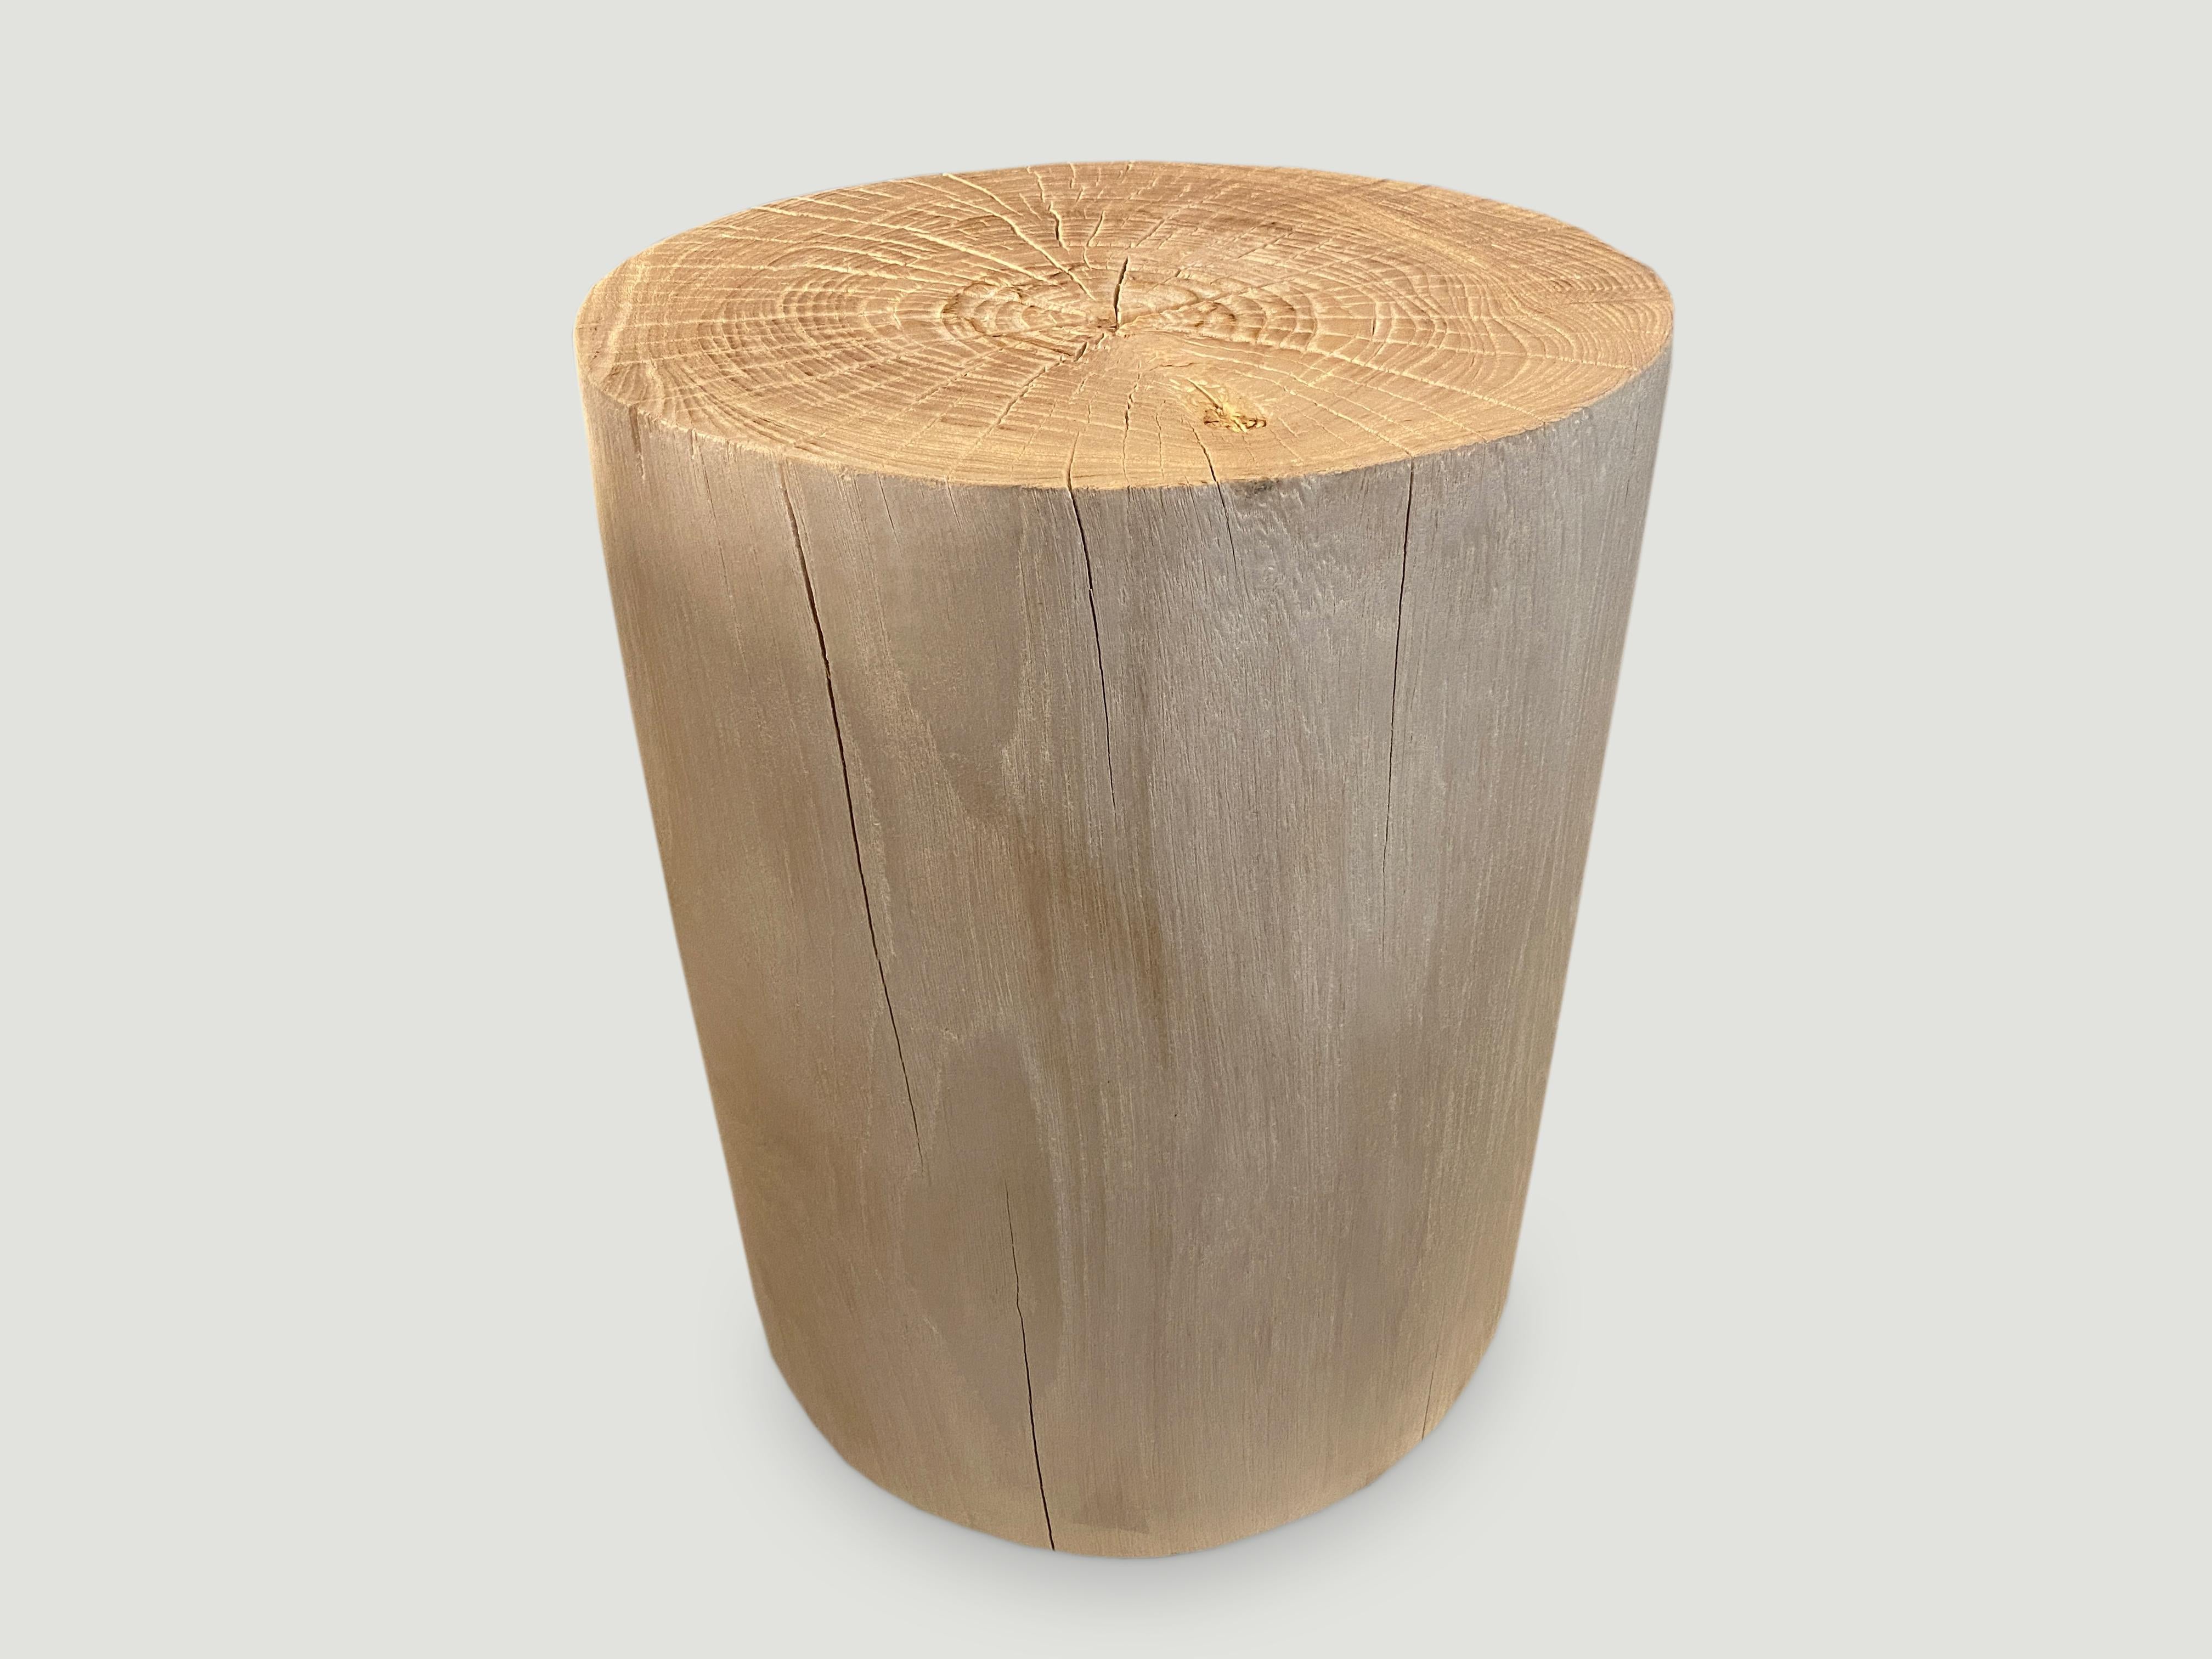 Reclaimed teak wood cylinder side table or stool. Bleached and carved into a minimalist cylinder whilst respecting the natural organic wood. Also available charred.

The St. Barts Collection features an exciting new line of organic white wash,